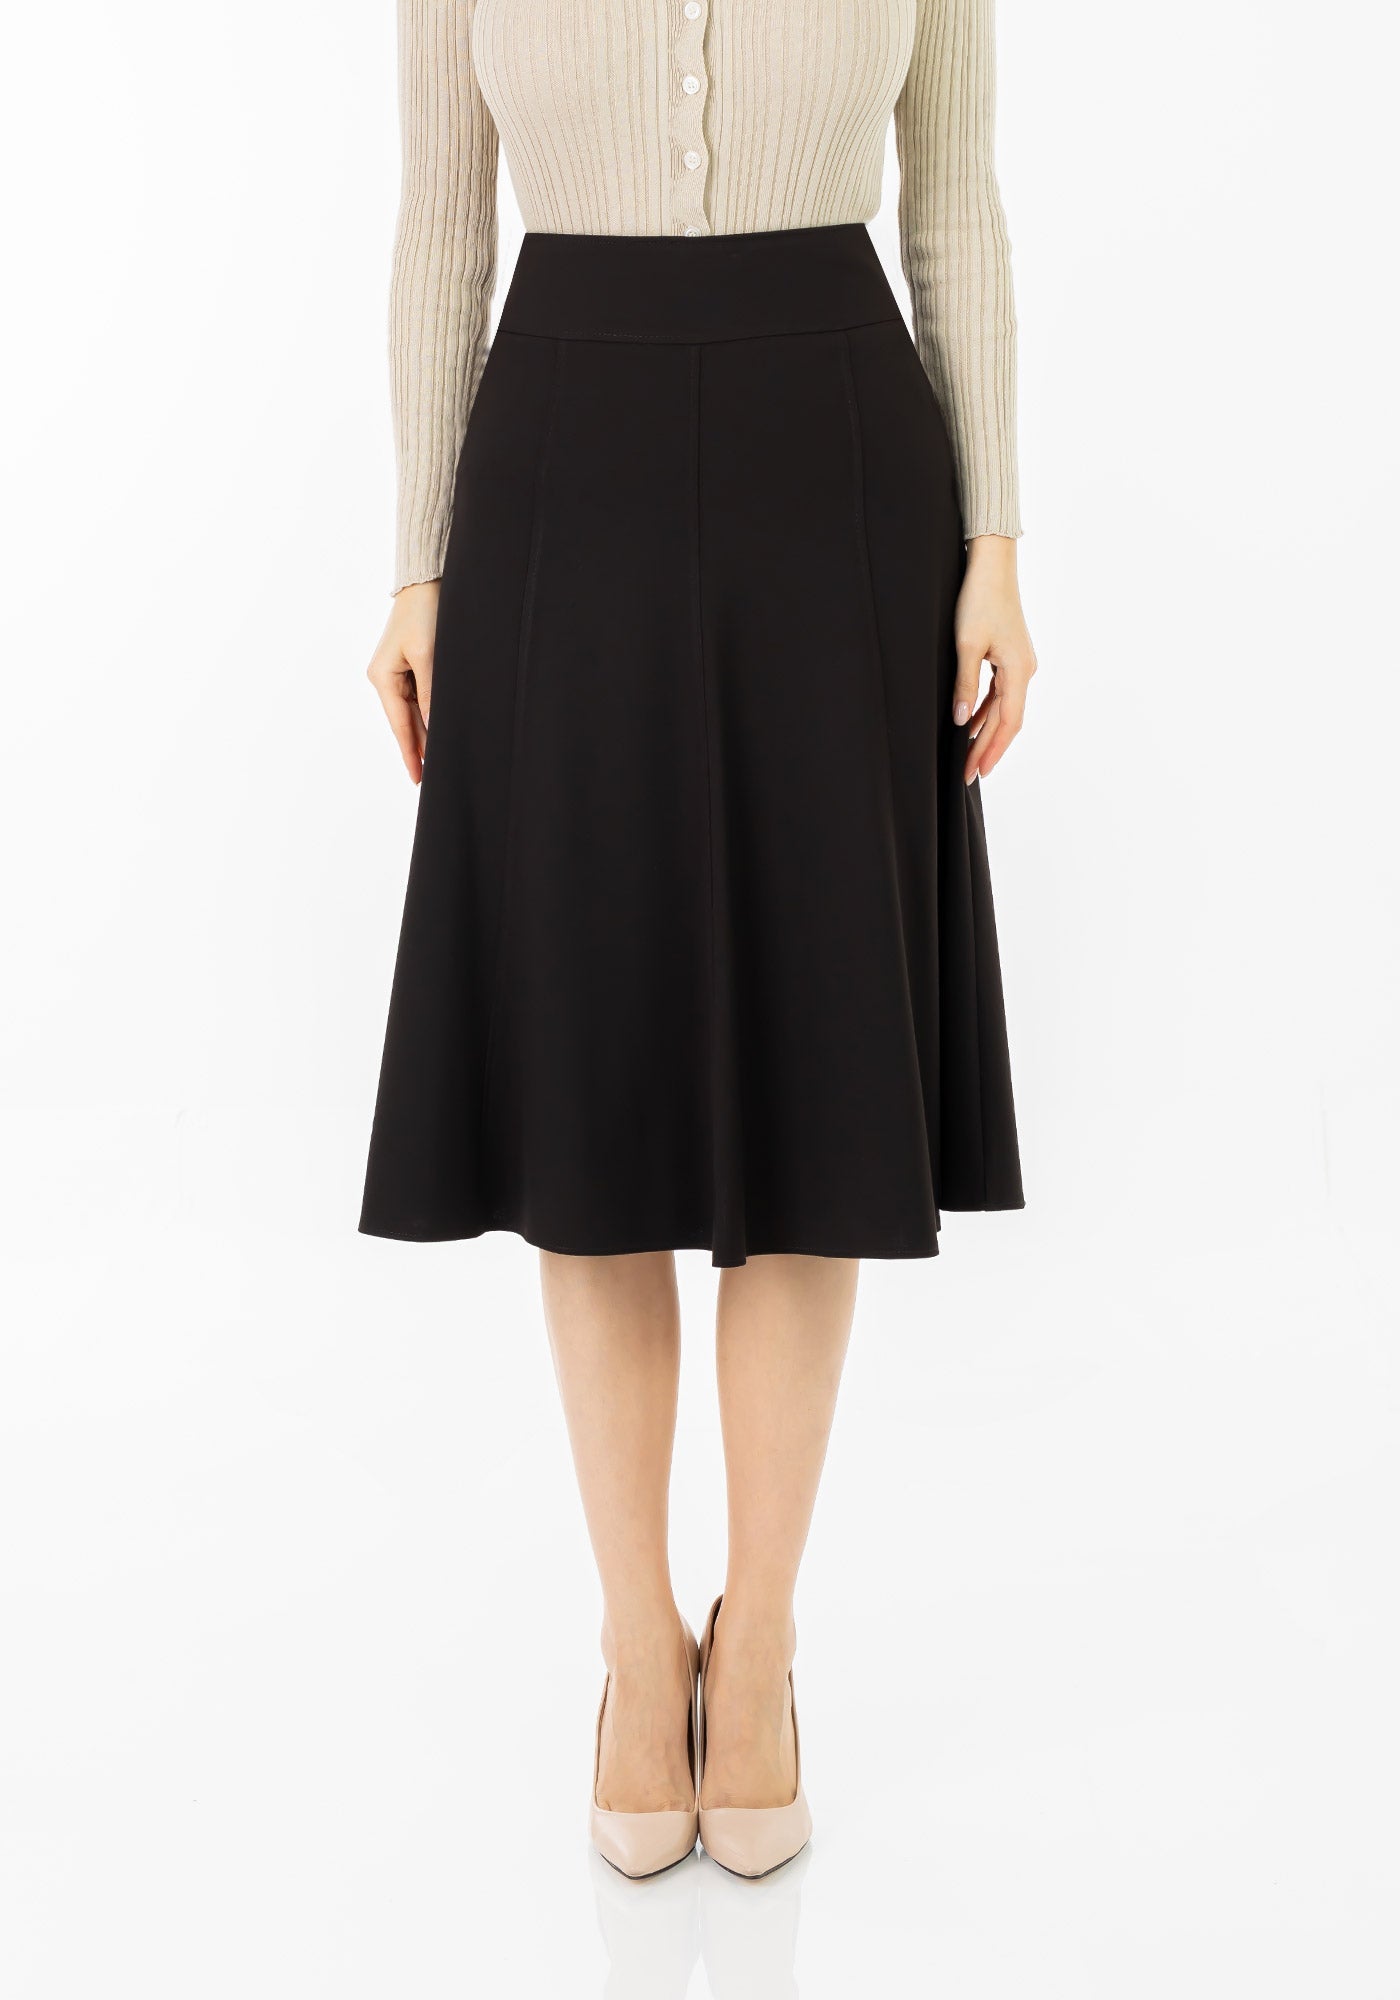 Eight Gore Calf Length Midi Skirt for Every Occasion G-Line